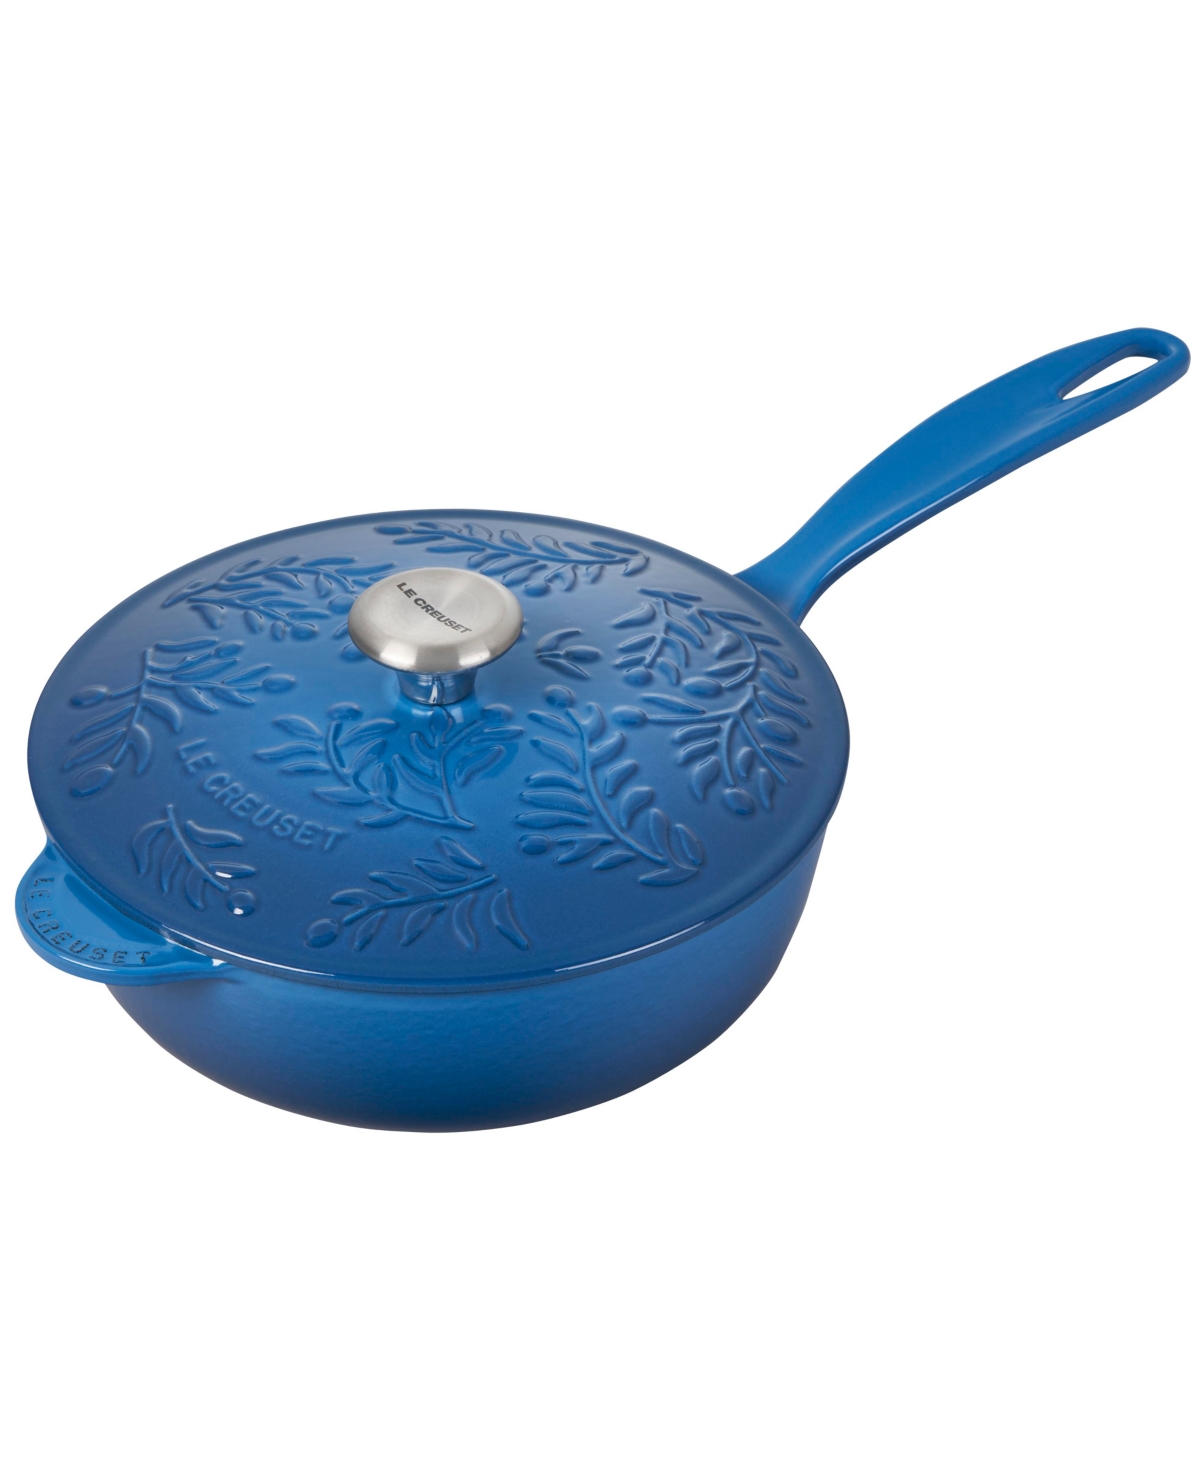 Le Creuset Cast Iron Saucier Pan With Embossed Olive Branch 2.25 Quart In Marseile